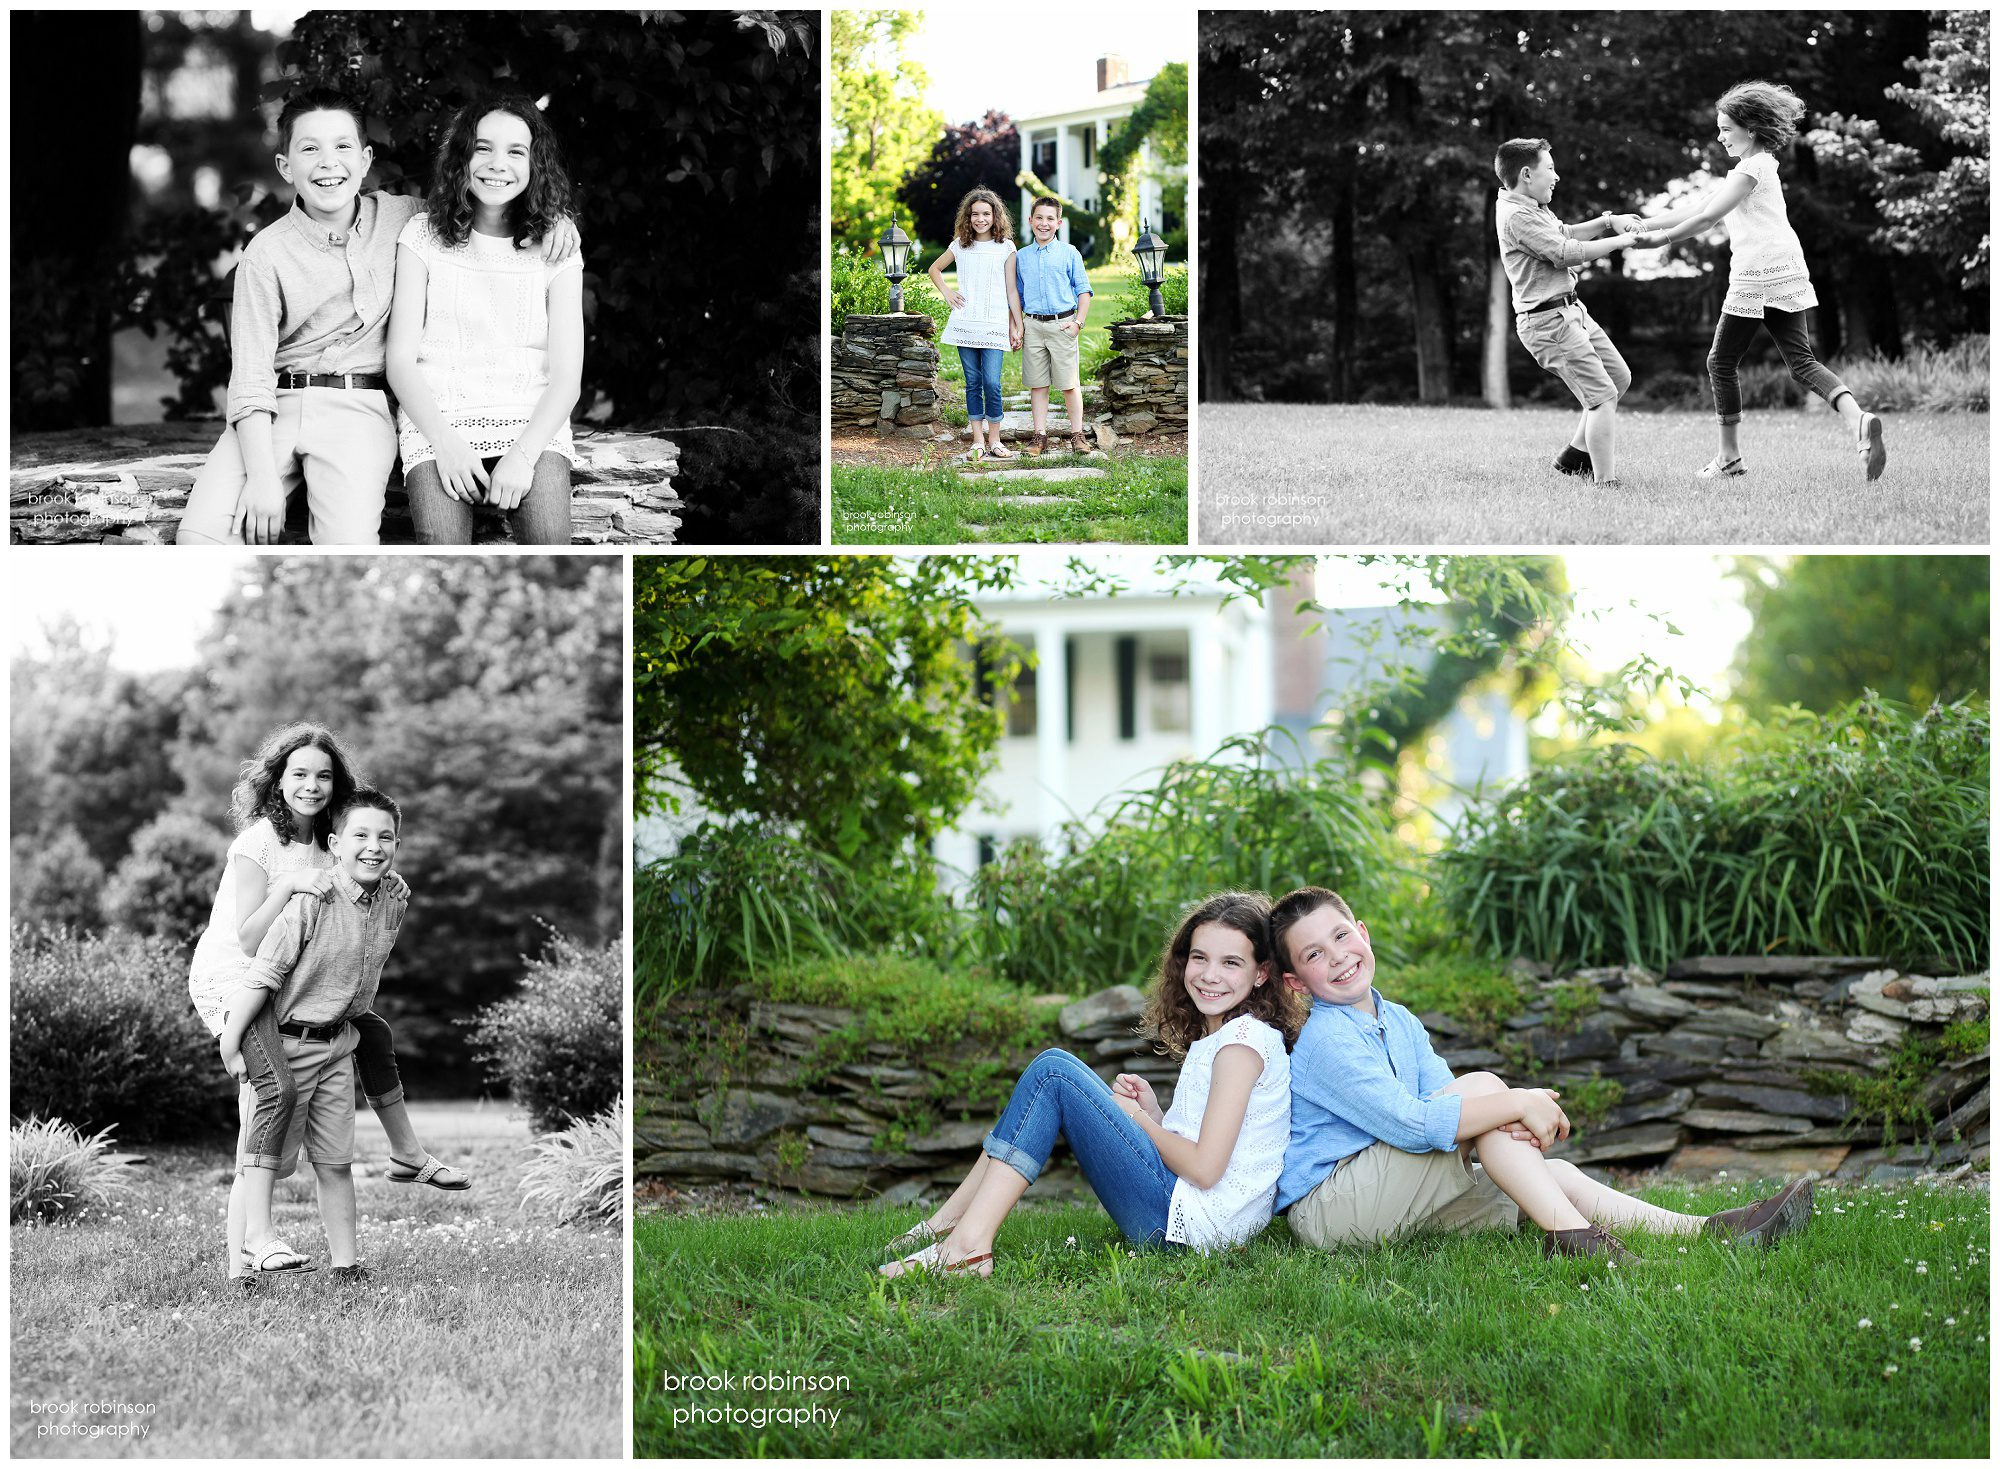 charlottesville family portraits clifton inn albemarle county central virginia summer spring siblings parents pictures photographer cookies chocolate chip